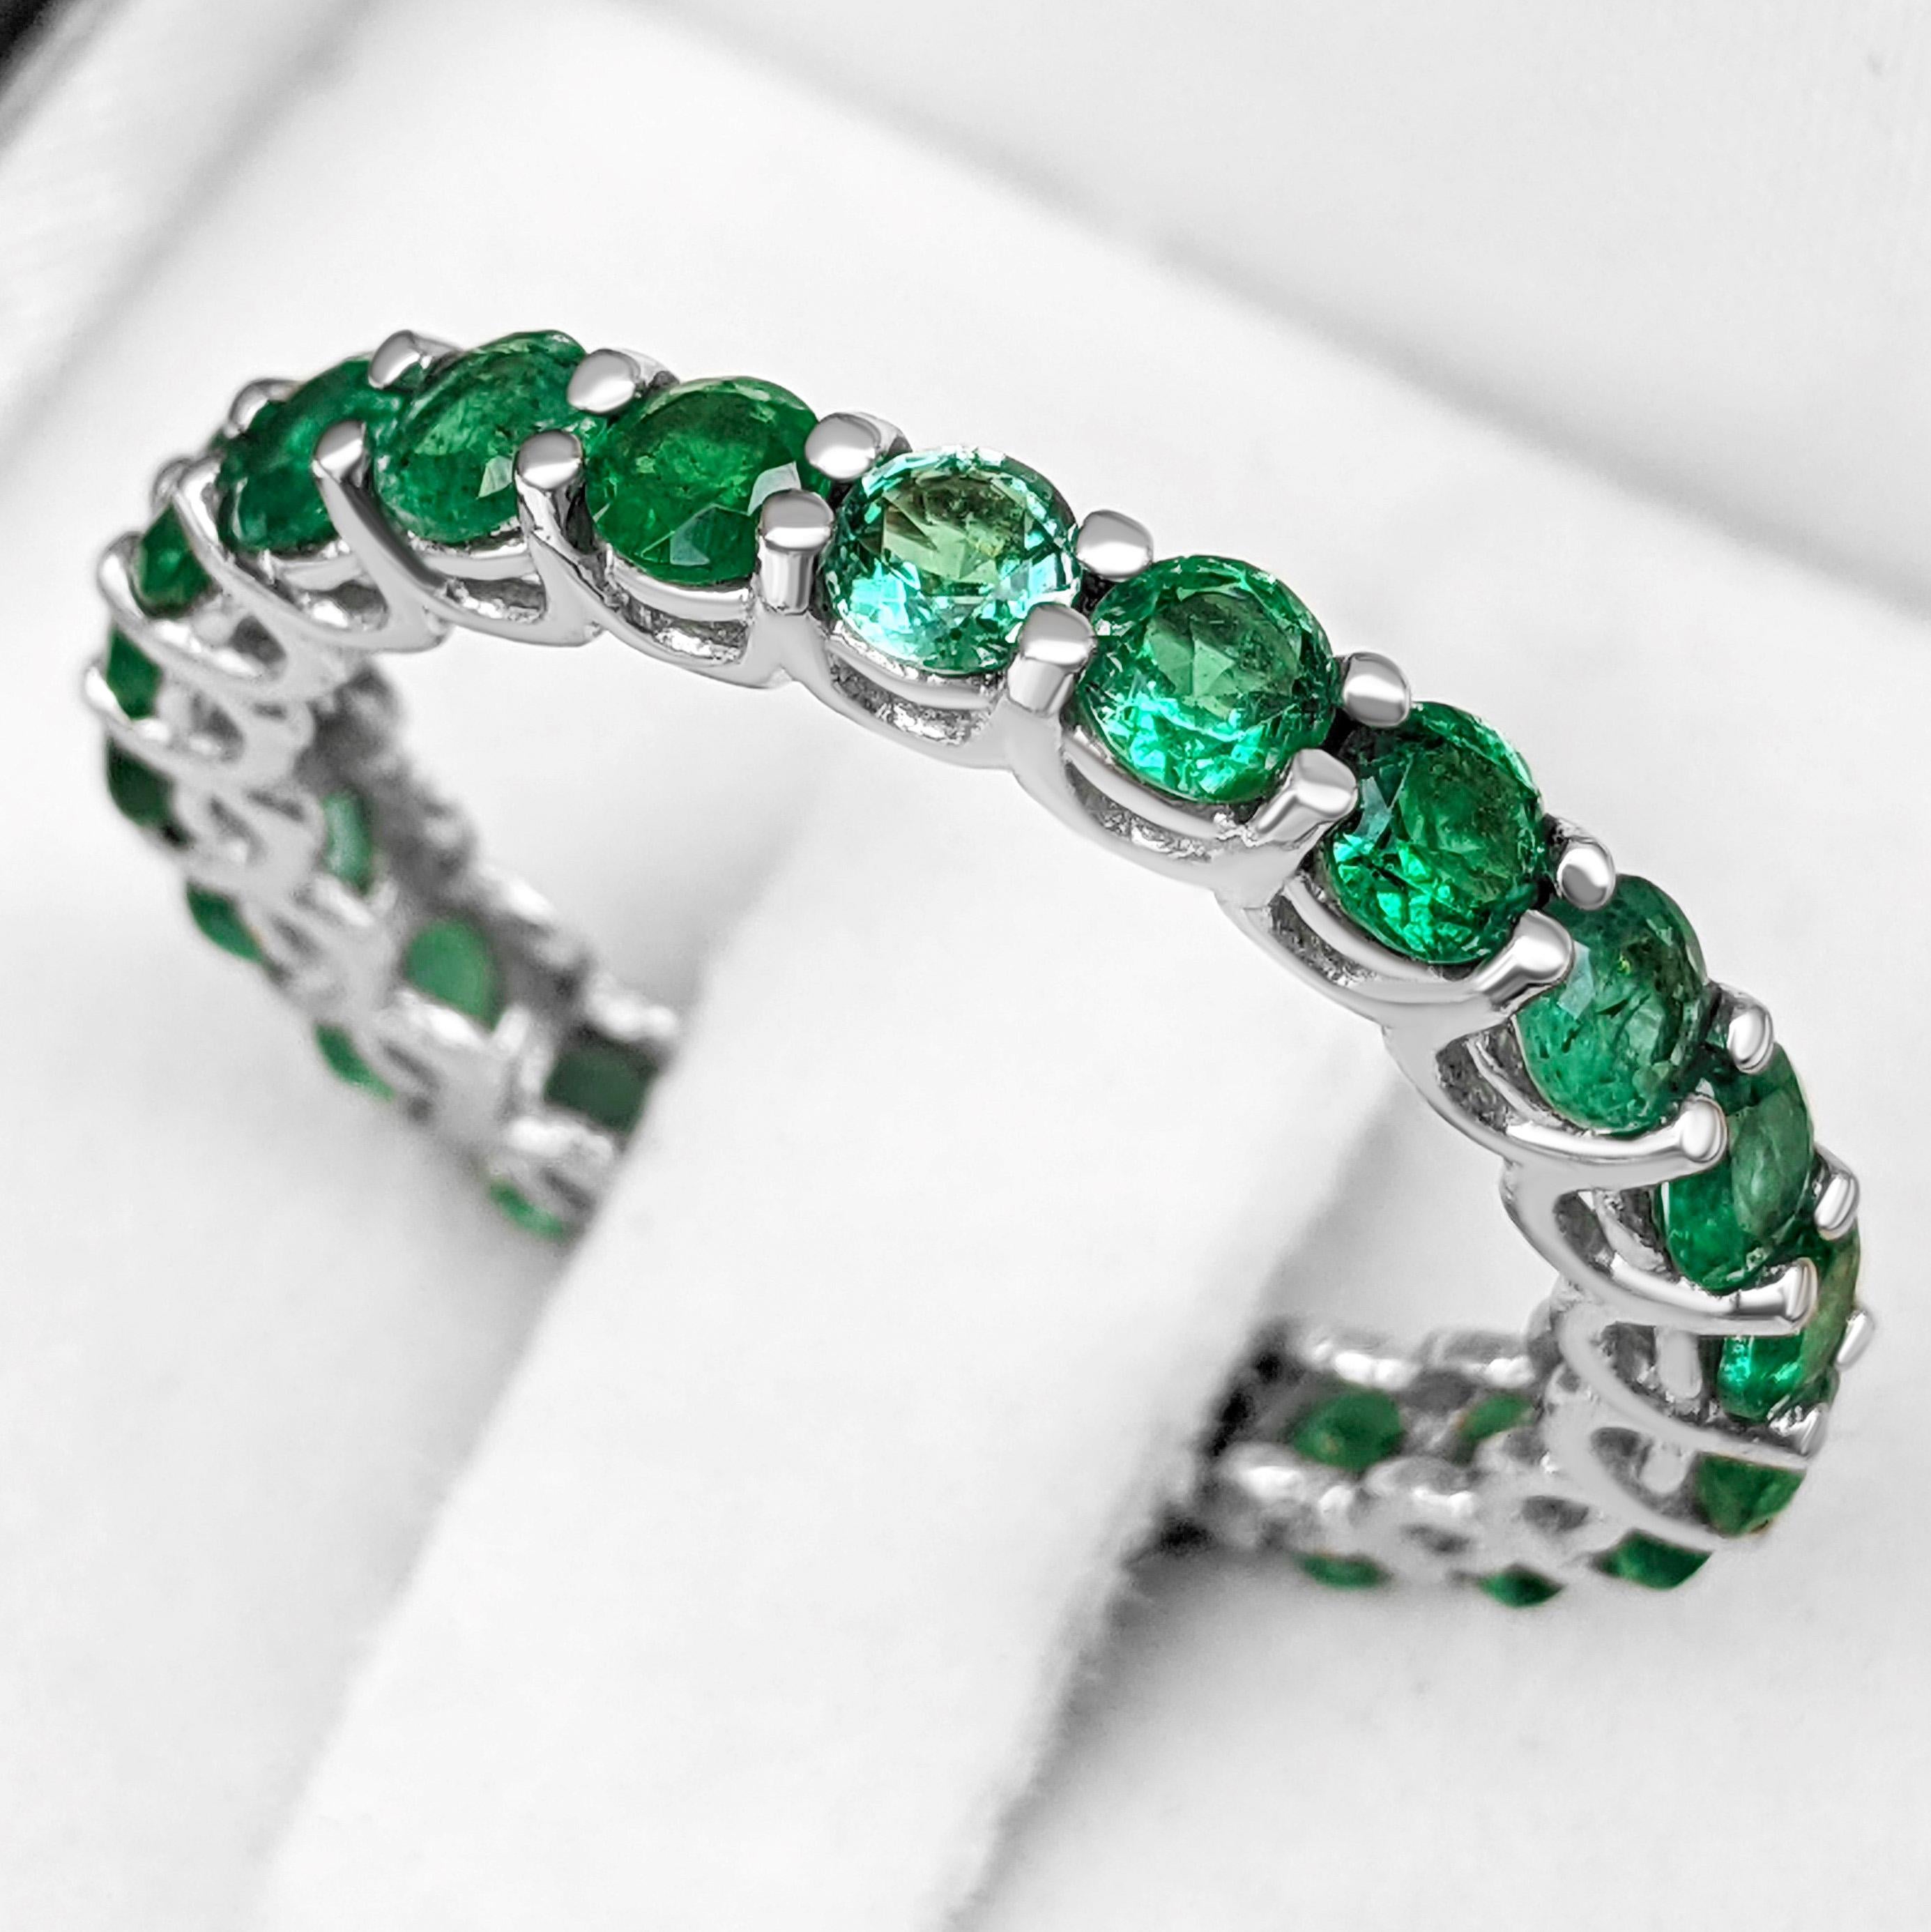 Round Cut $1 NO RESERVE! - 2.32cttw Natural Emeralds Eternity Band, 14K White Gold 